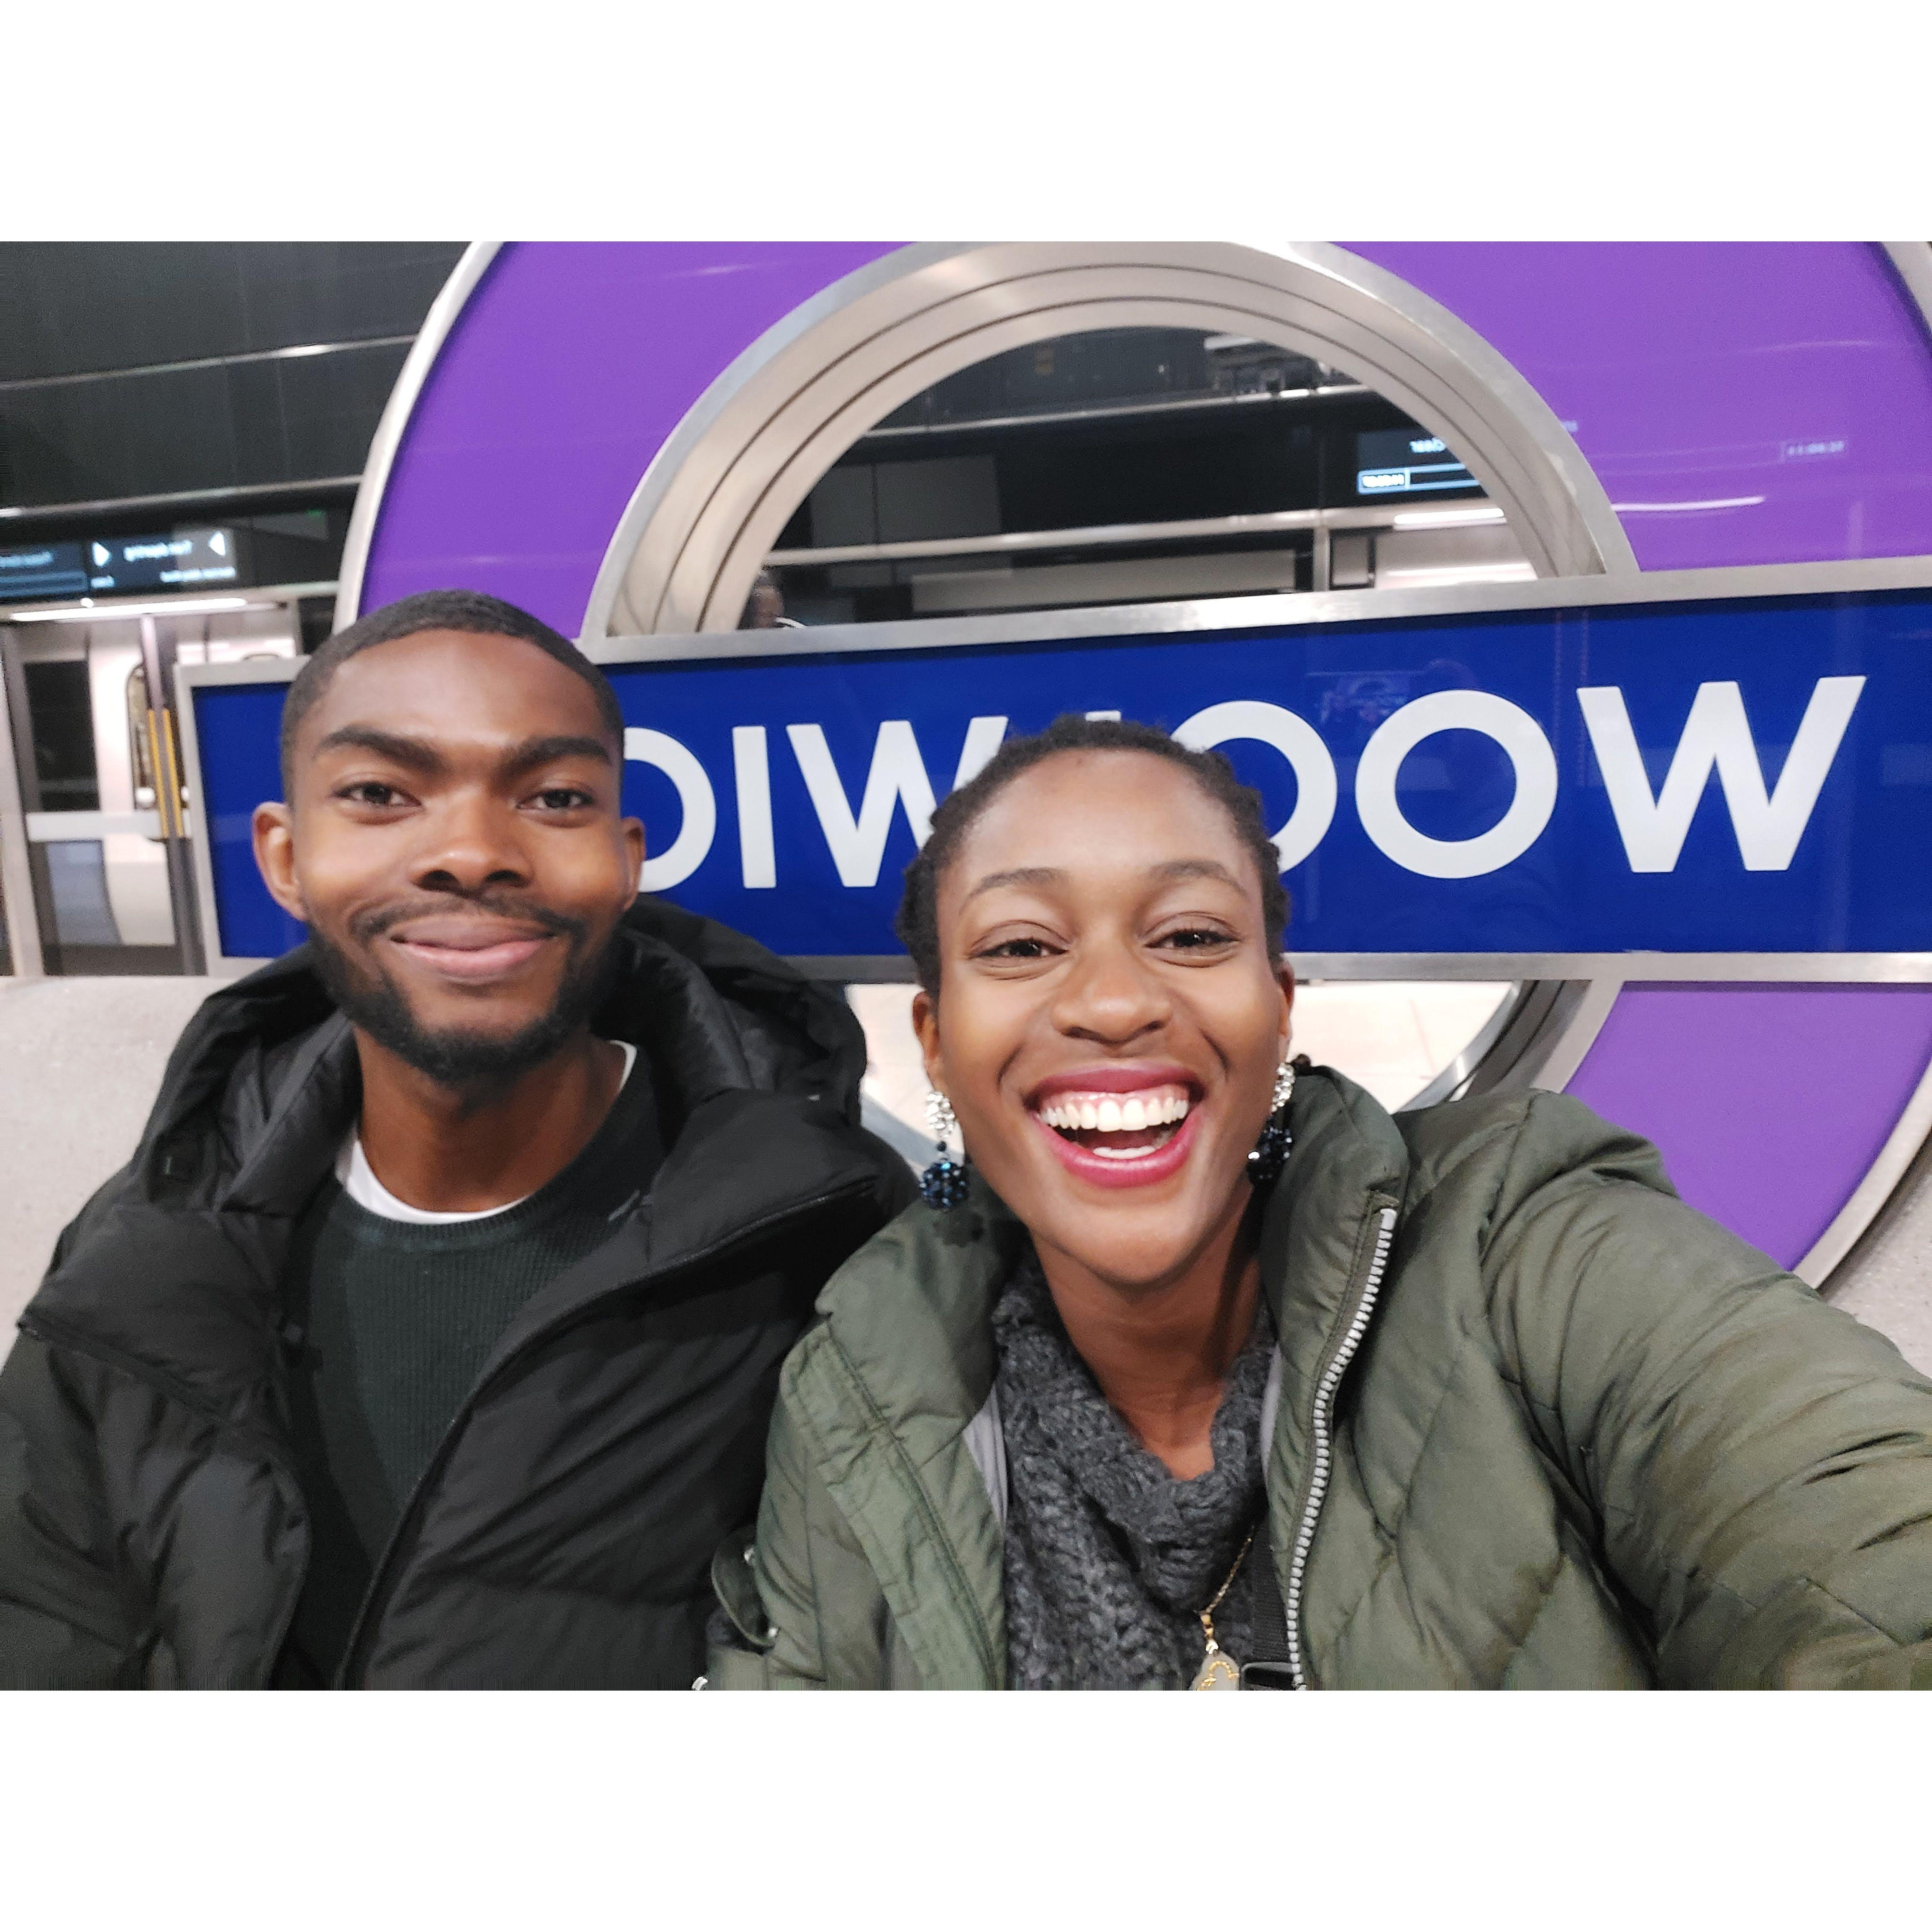 My first time visiting London with Uzo!